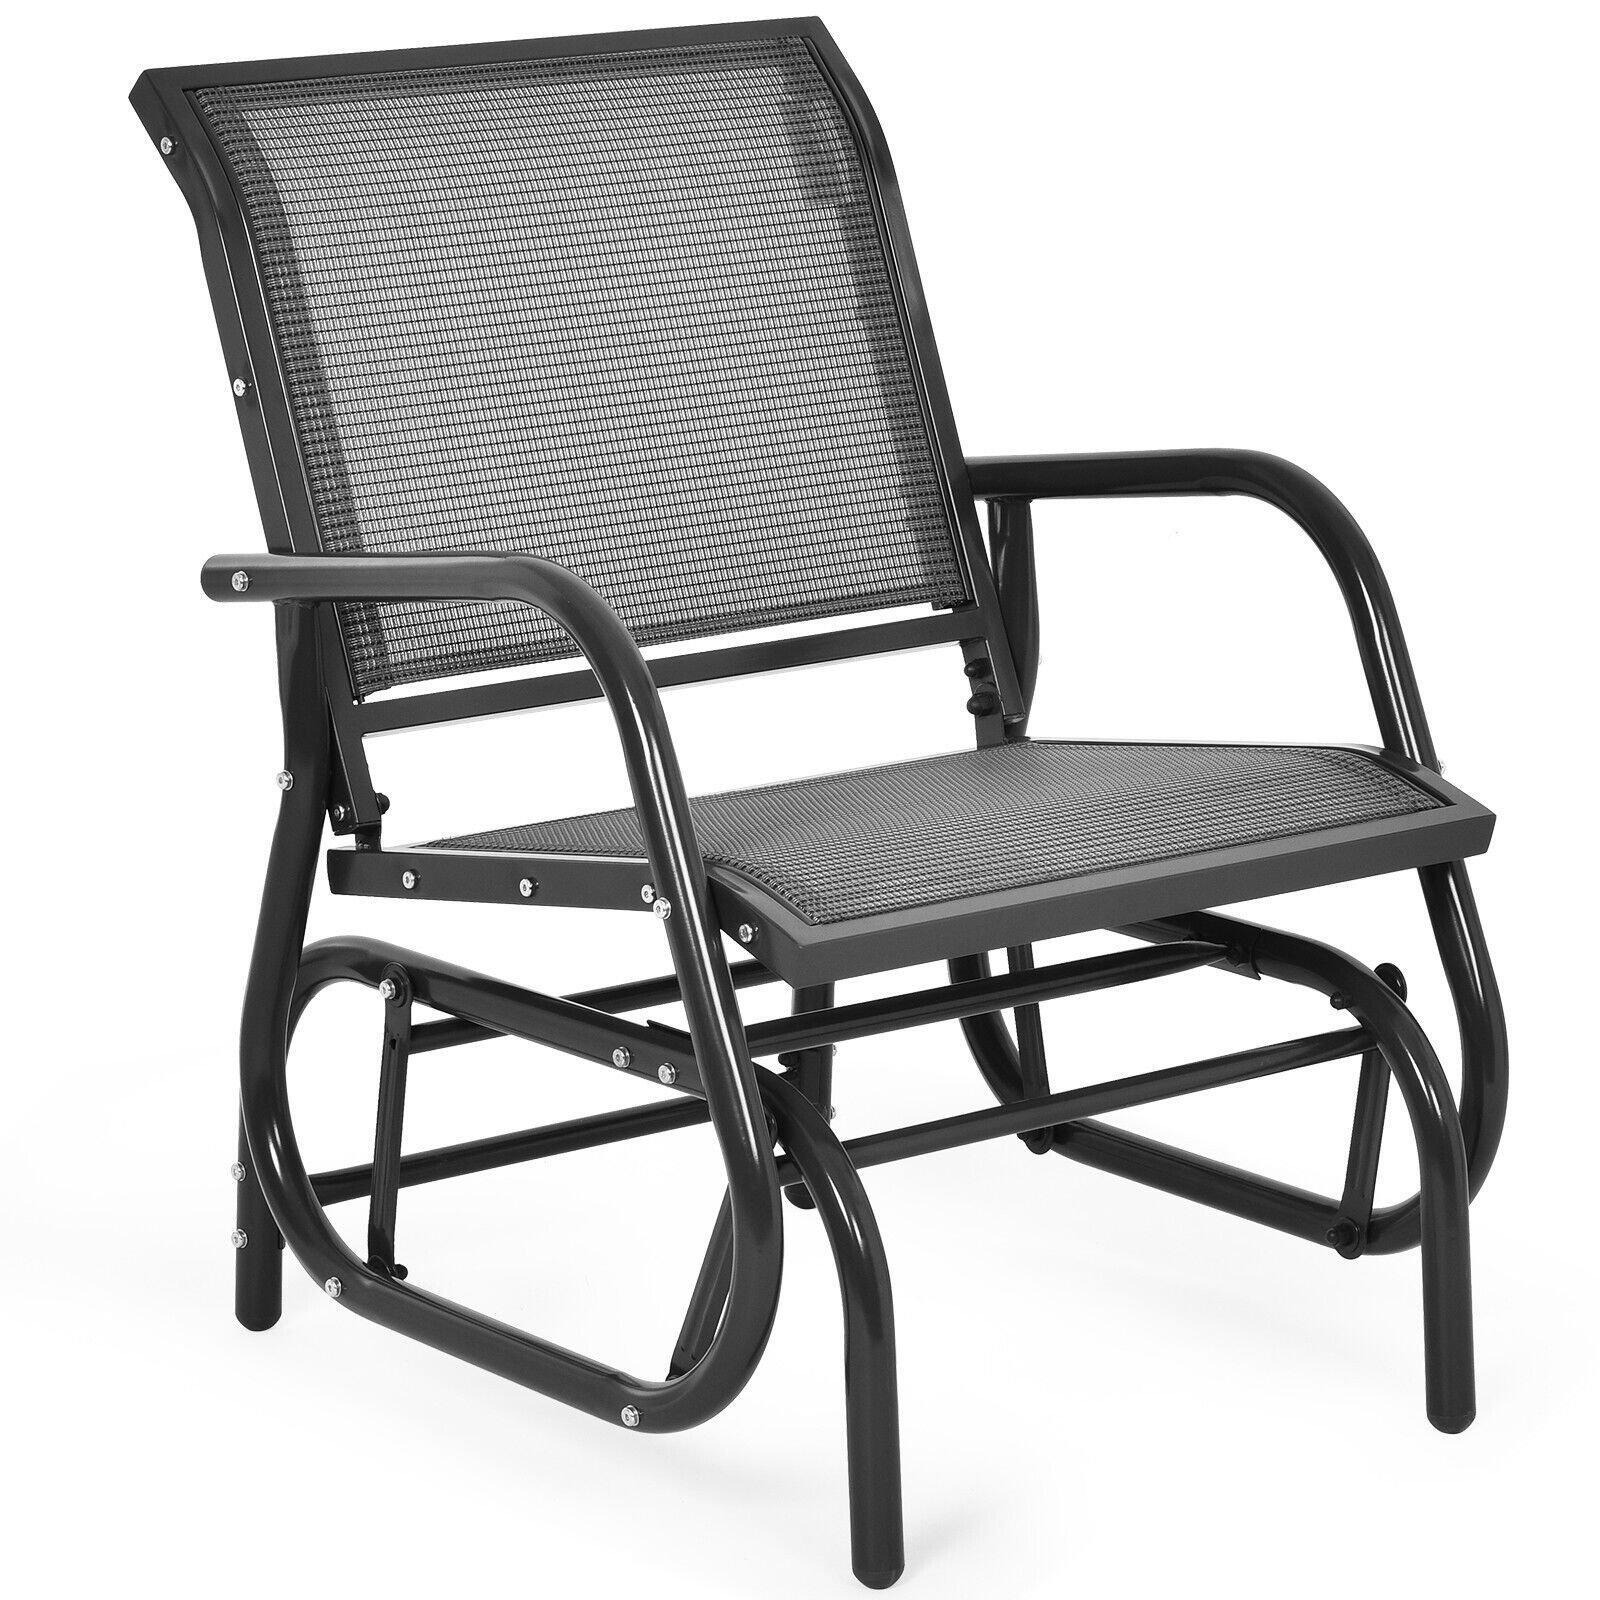 Swing Glider Chair Outdoor Single Rocking Chair Patio Chair Garden - image 1